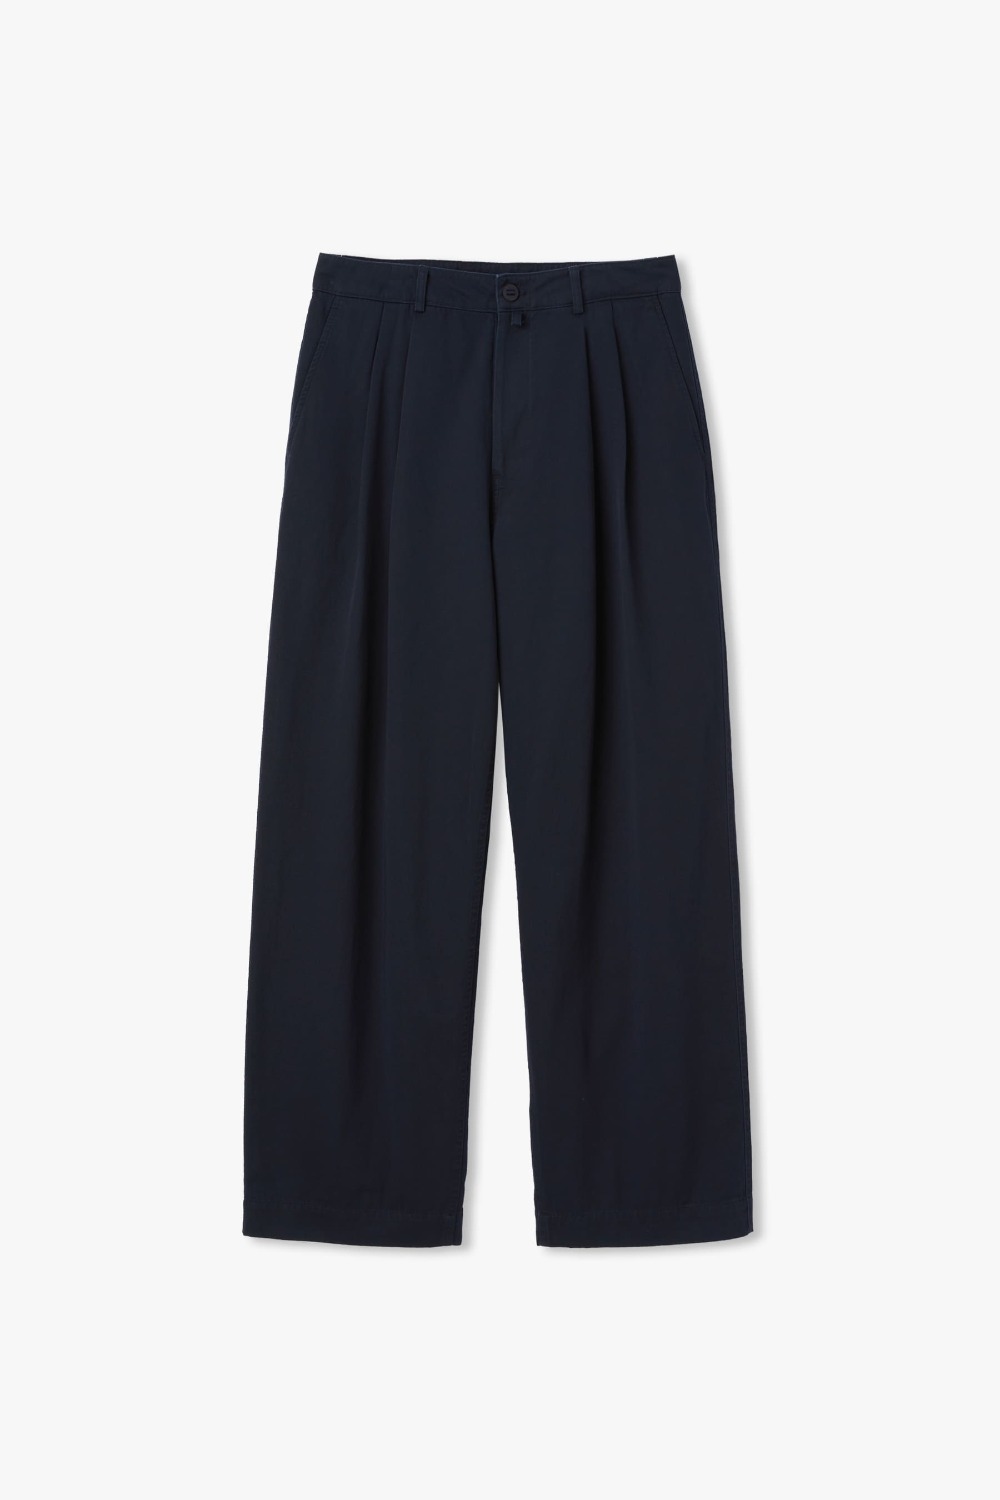 DEEP NAVY YRS Y-550 WIDE CHINO PANTS (ECP GARMENT DYED)